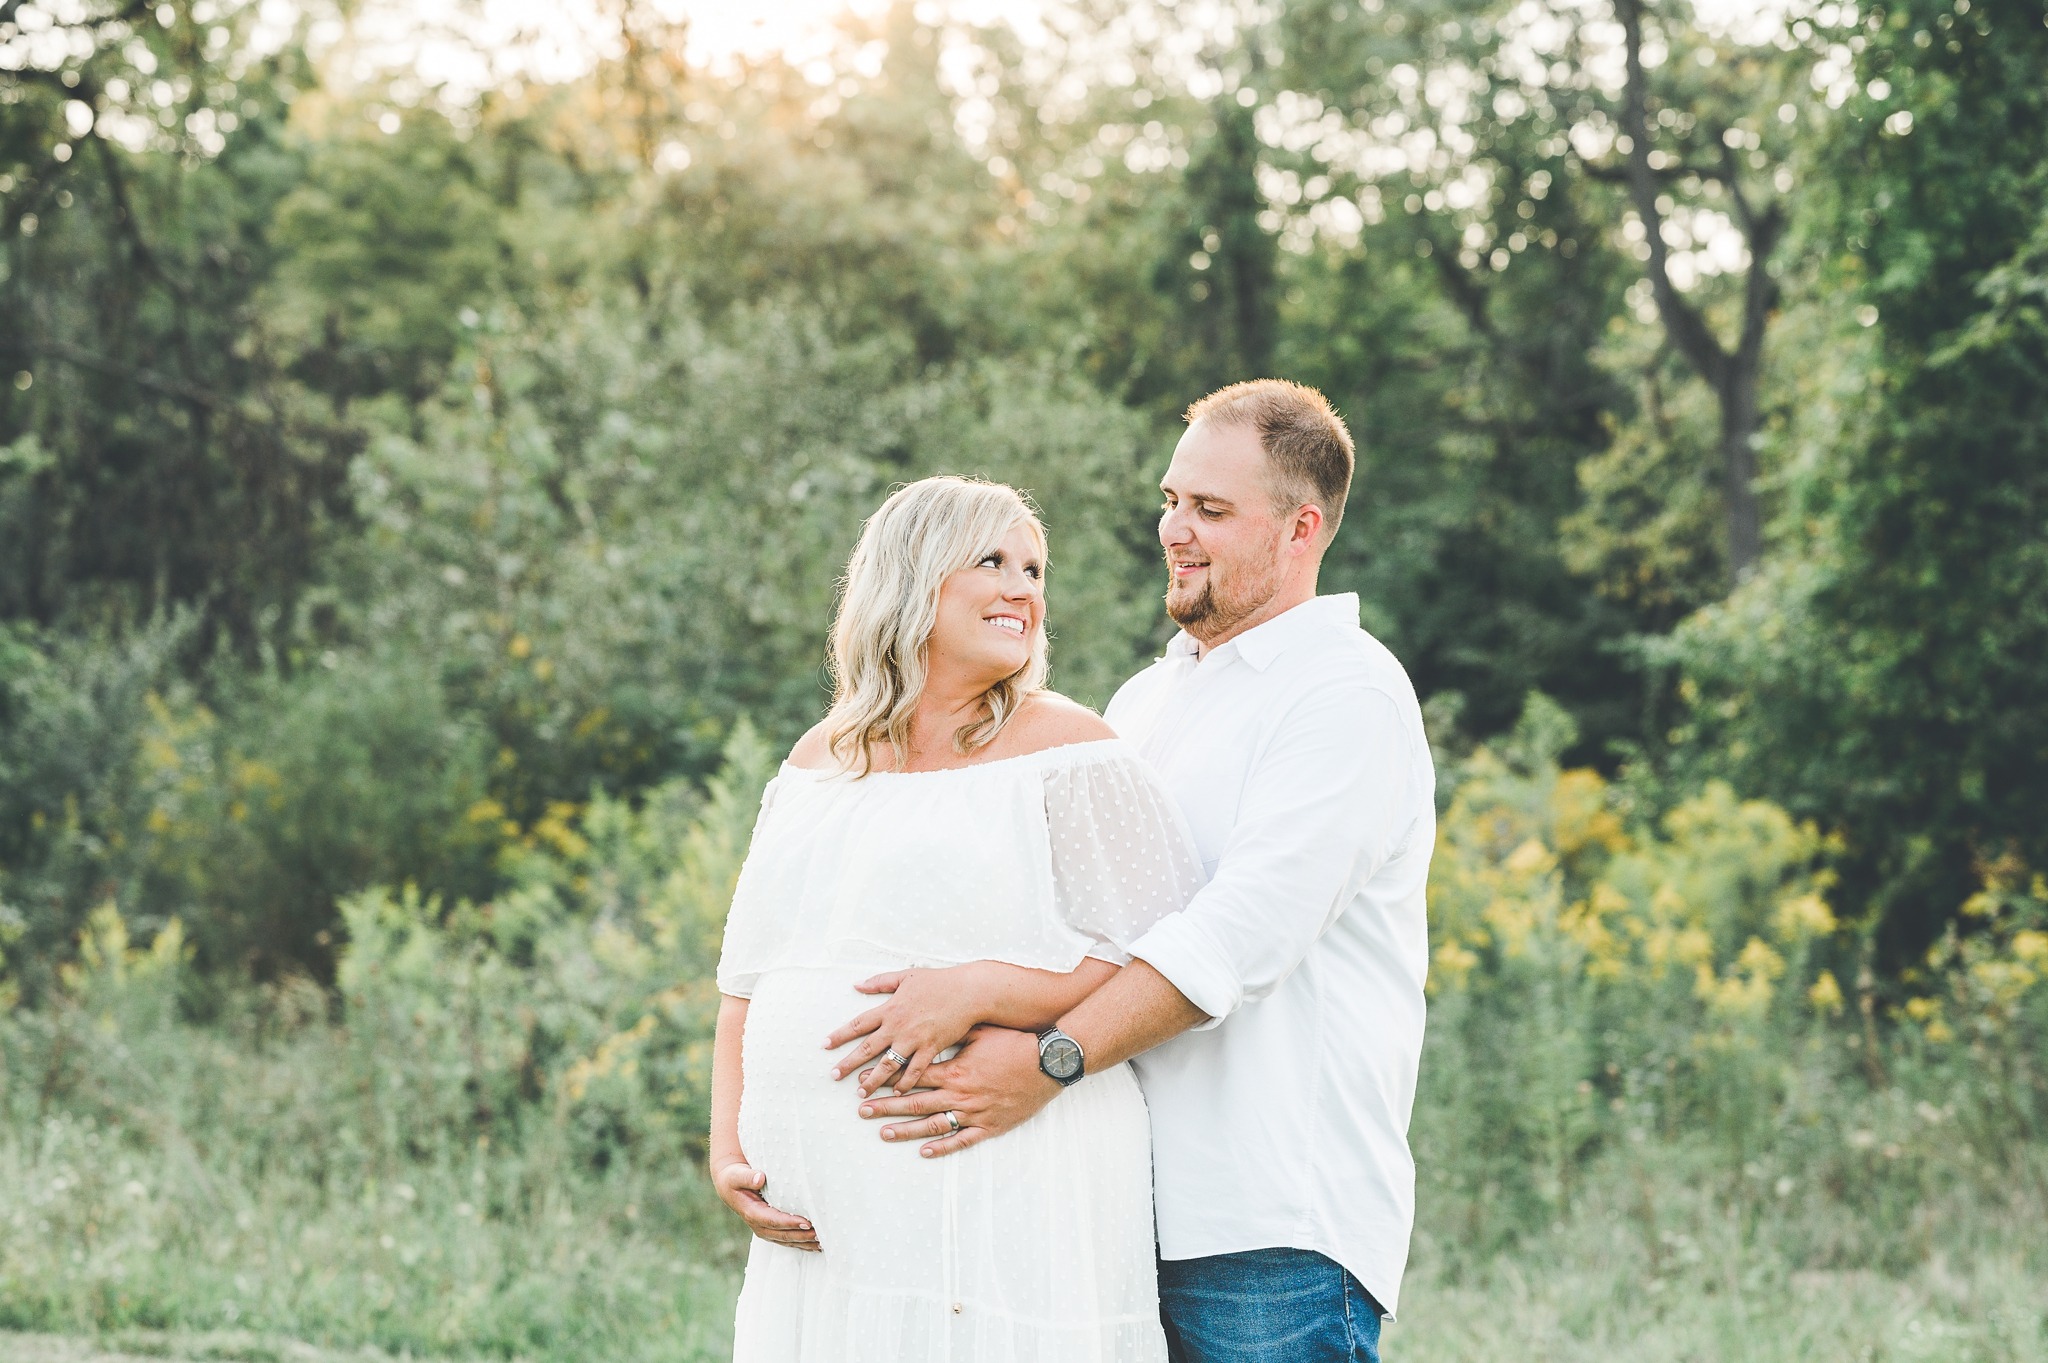 When to Schedule Maternity Photos | Expecting Baby Micsky